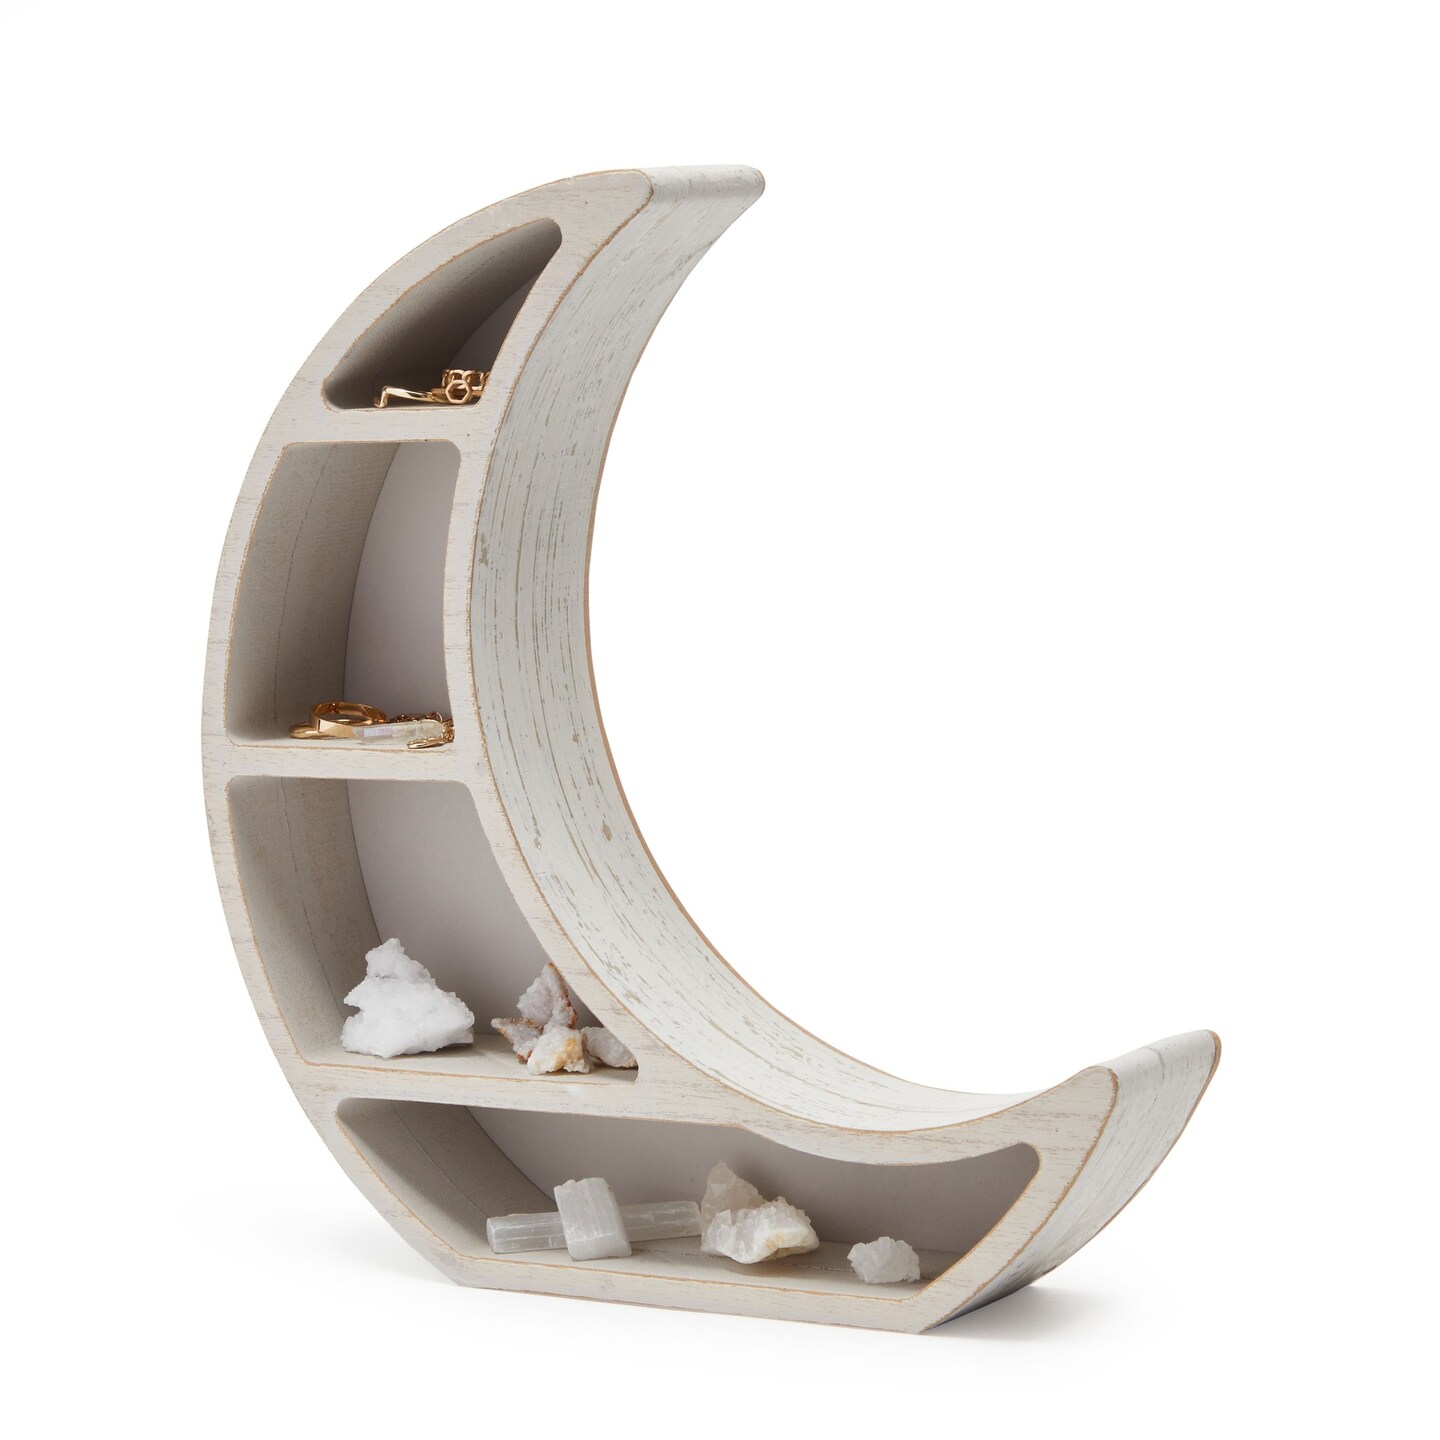 Wood Crescent Moon Shelf, Rustic White Home Decorations (10 x 10.2 x 2 In)